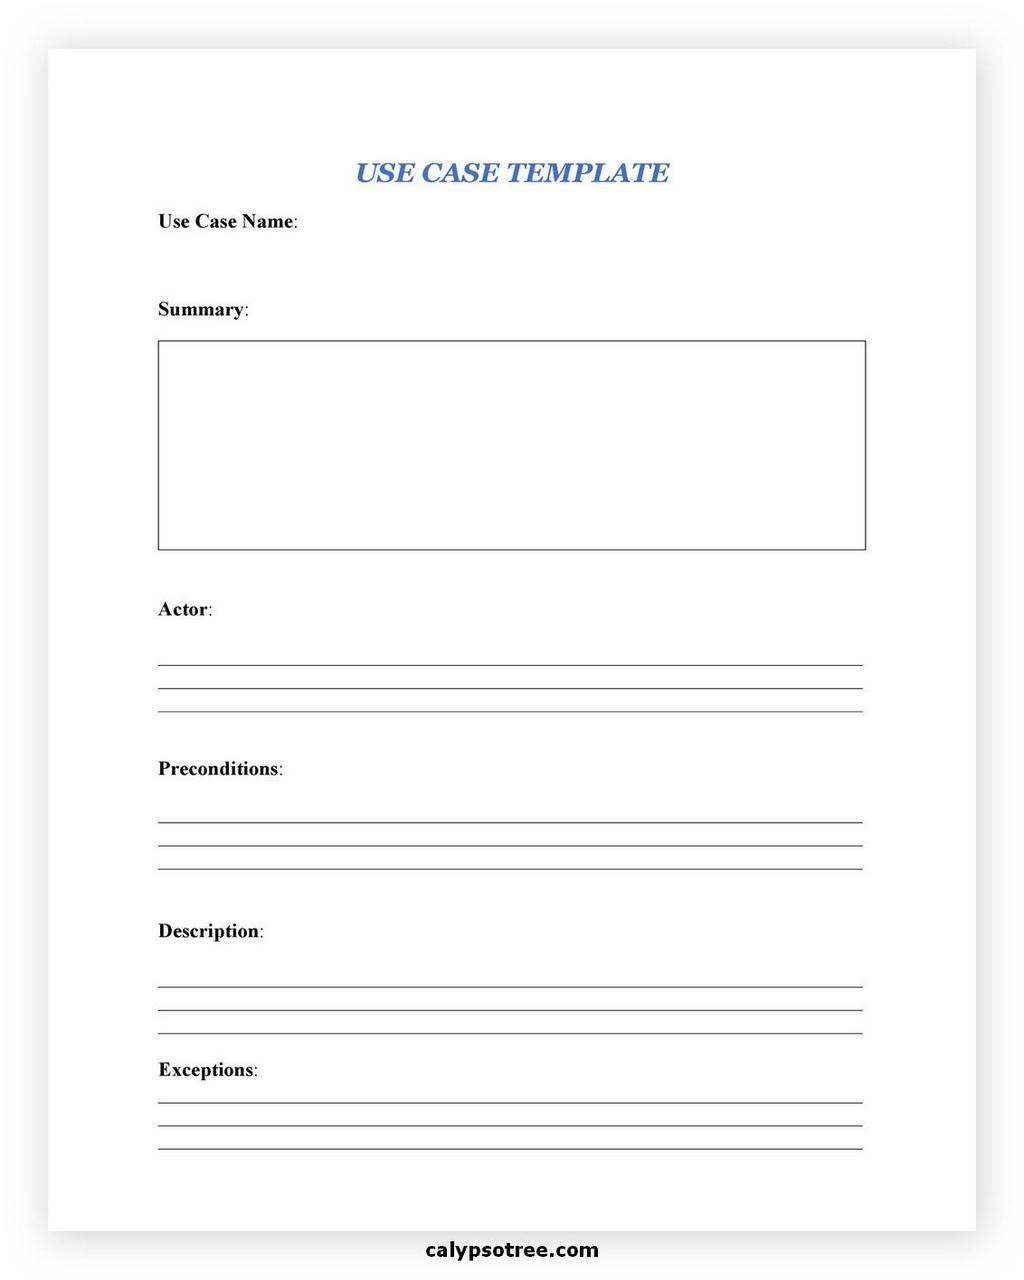 use case template excel 05